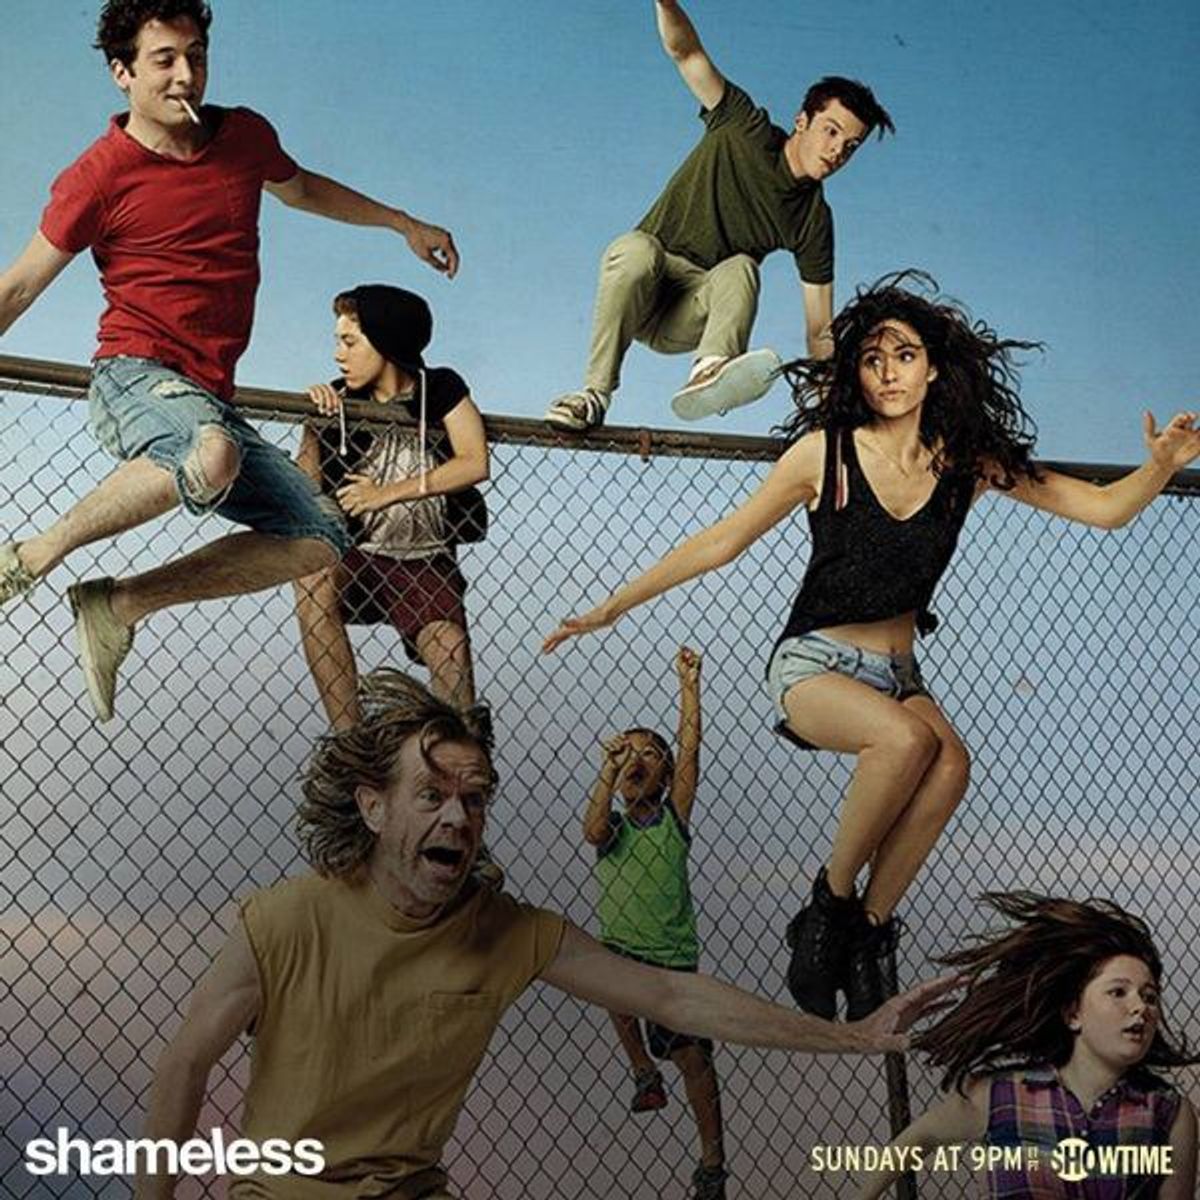 11 Reasons to Watch Shameless